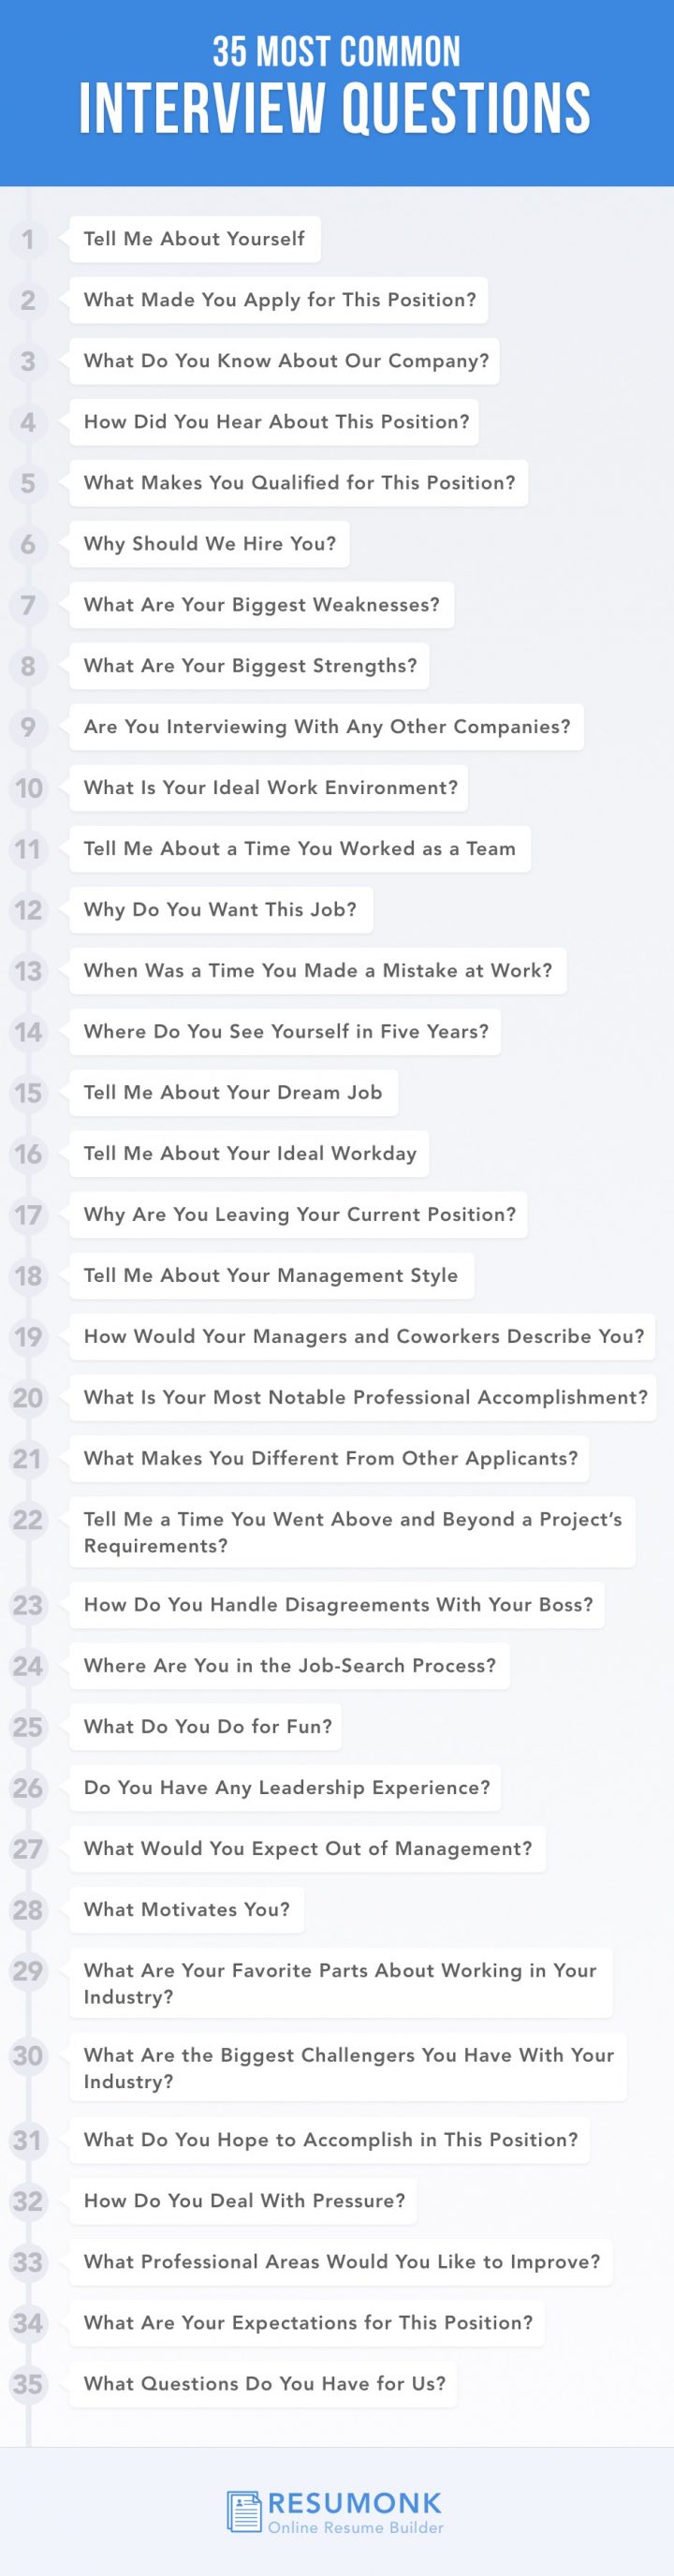 35 Most Common Interview Questions and How to Answer Them - Resumonk Blog